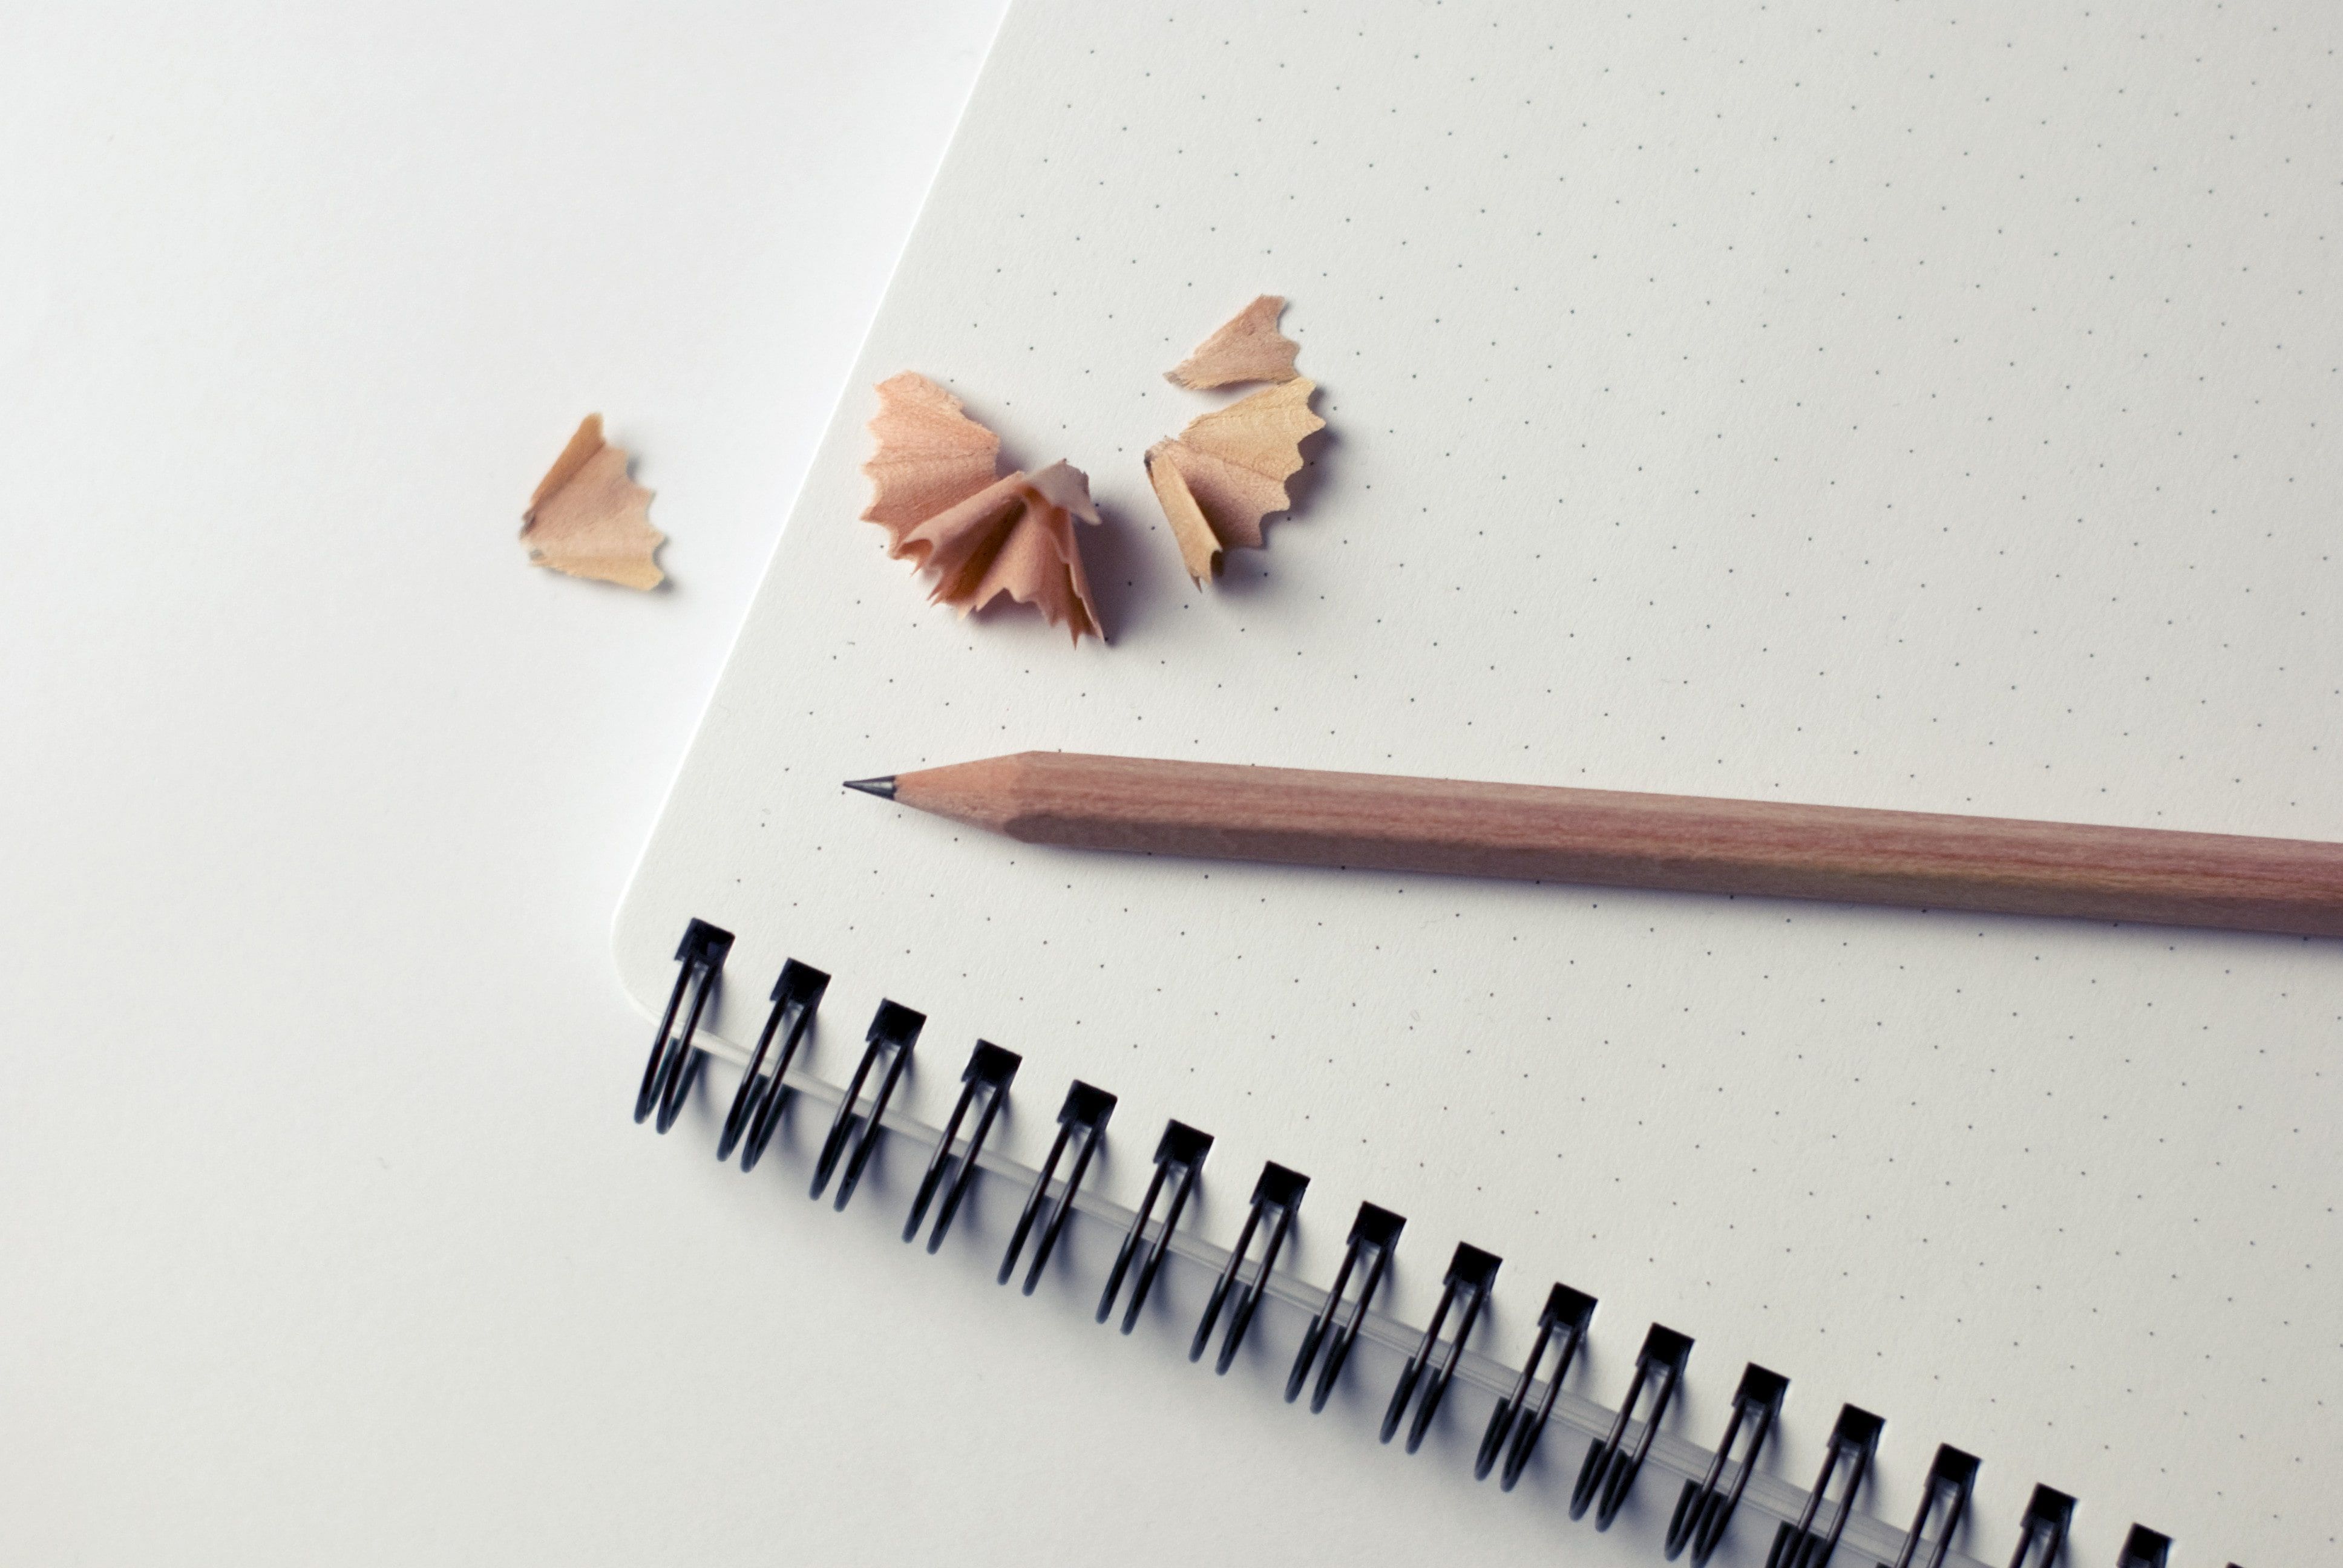 Pencil with pencil sharpening's on notebook - Where to place your branding - Image